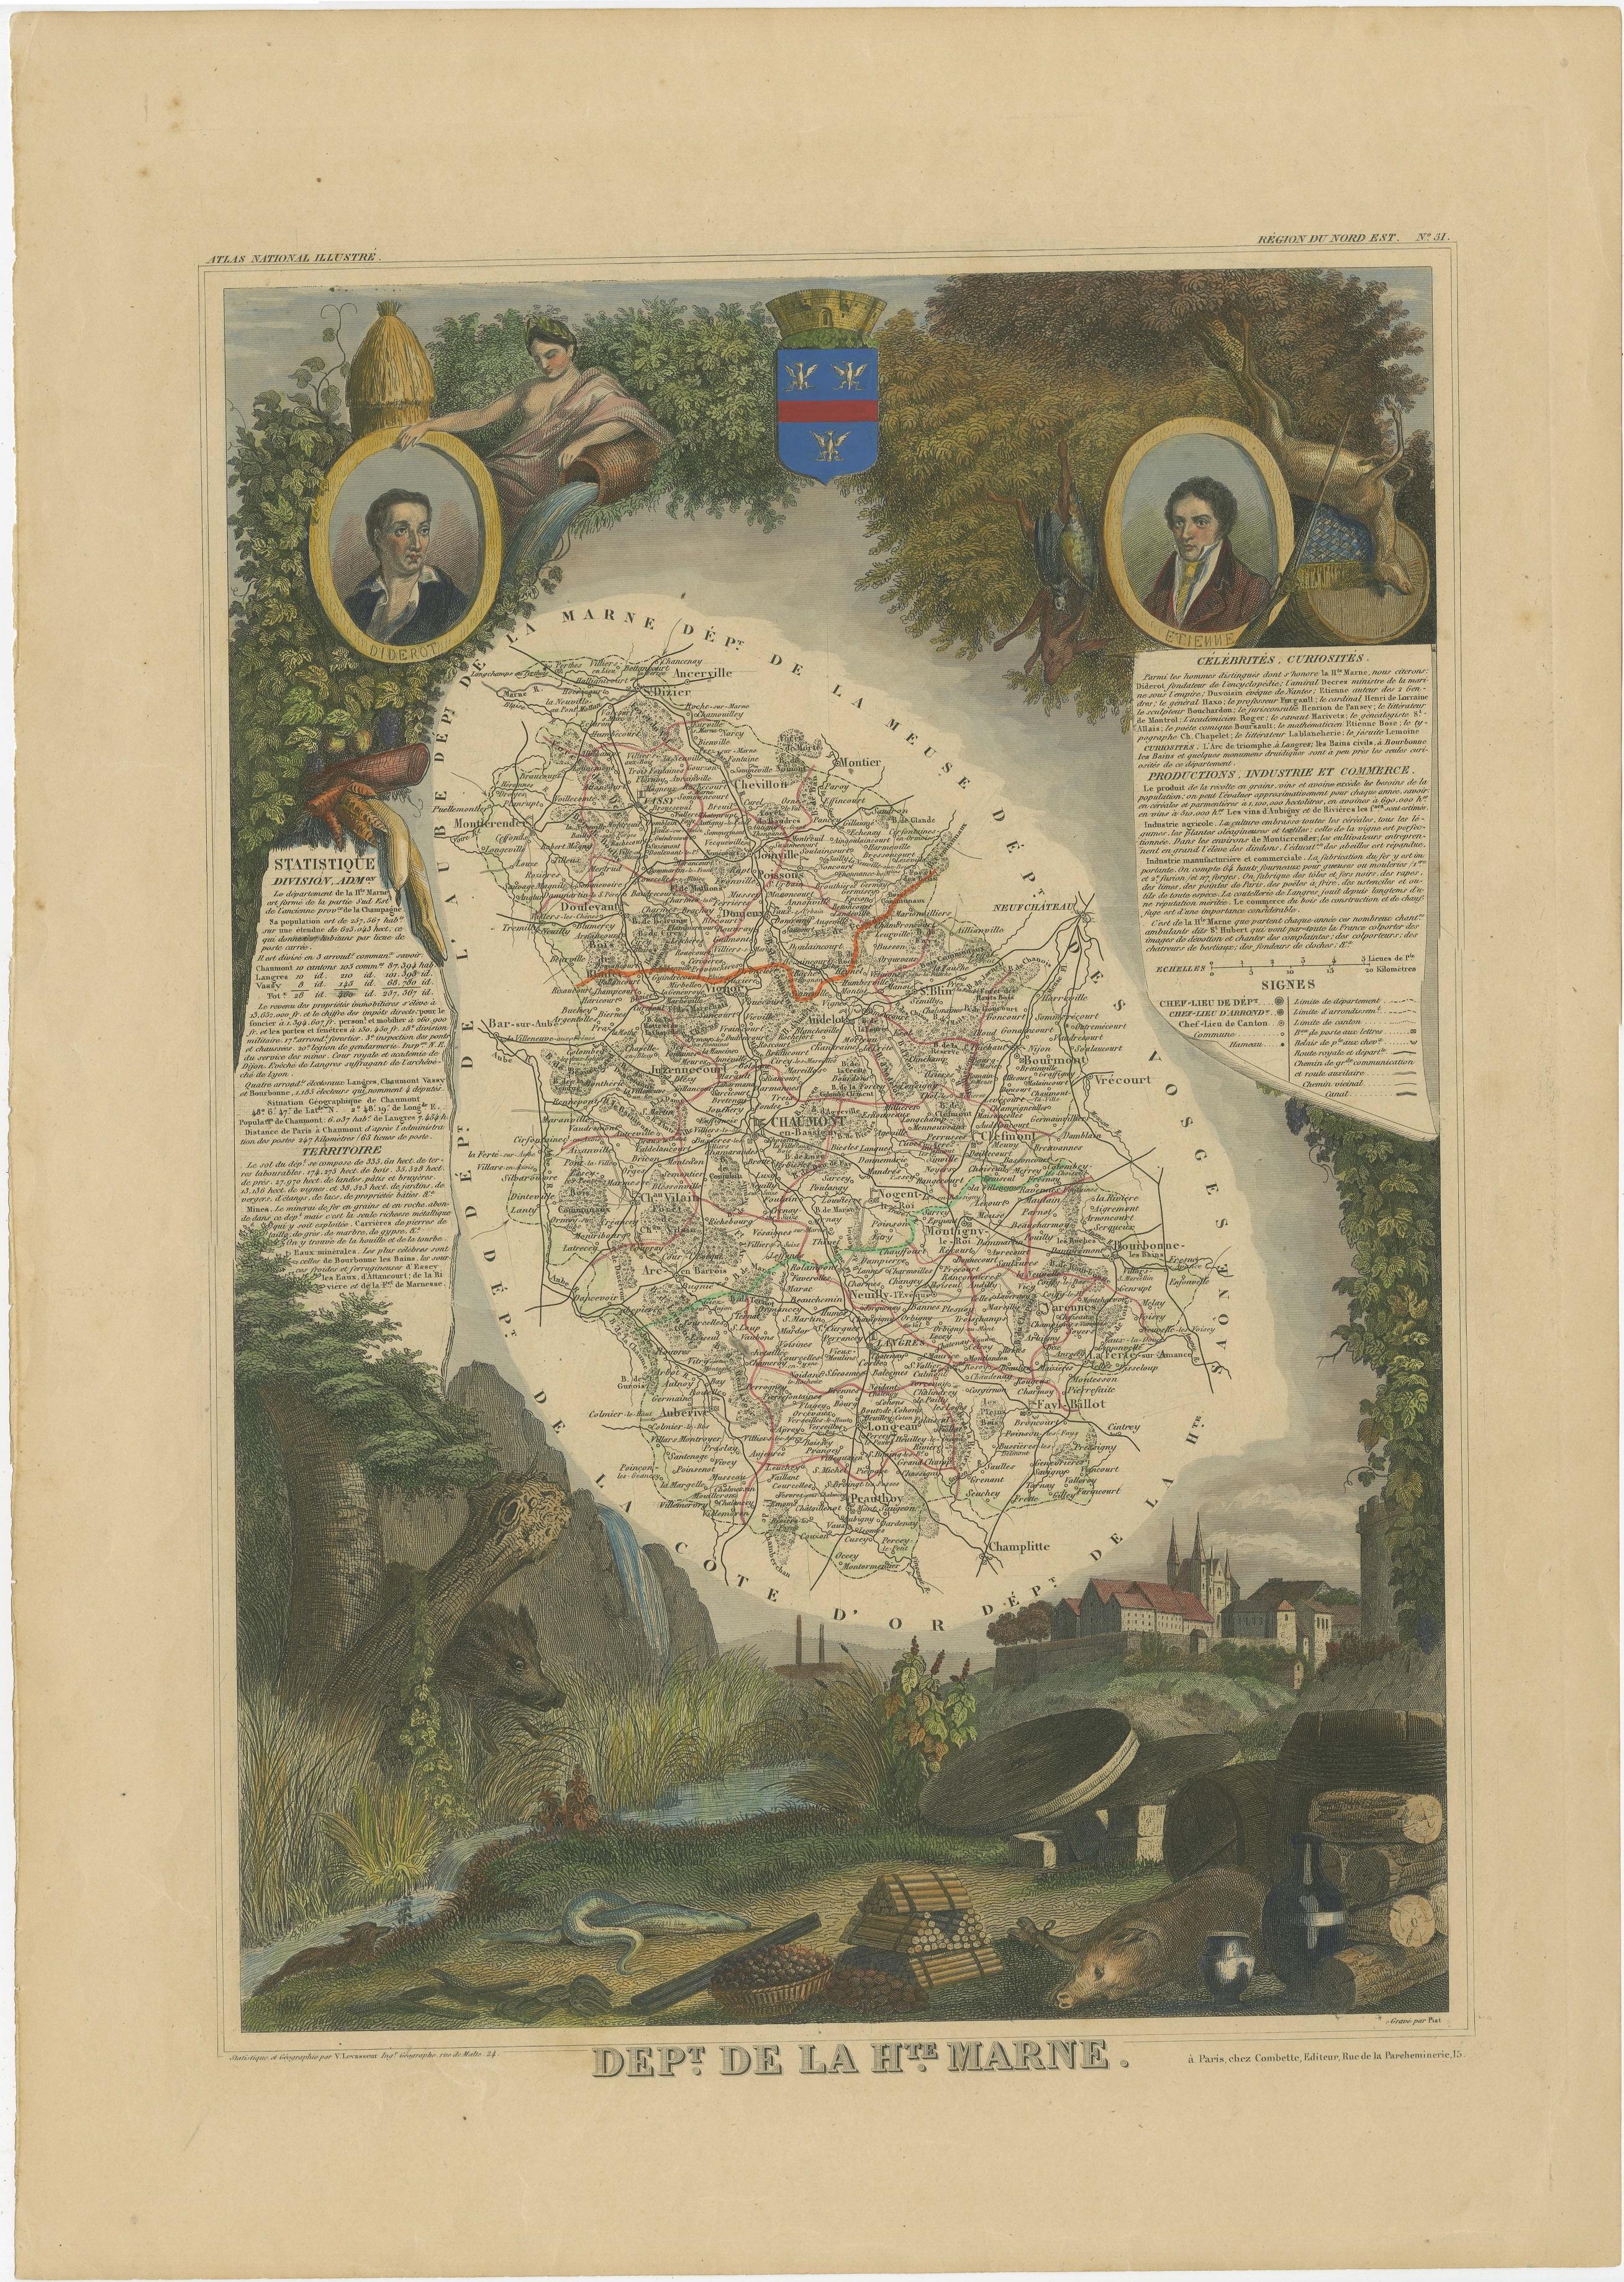 Antique map titled 'Dépt. de la Hte Marne'. Map of the French department of Haute Marne, France. This department is part of the Champagne region, where the world-famous sparkling wine of the same name is produced. This area is known for a variety of